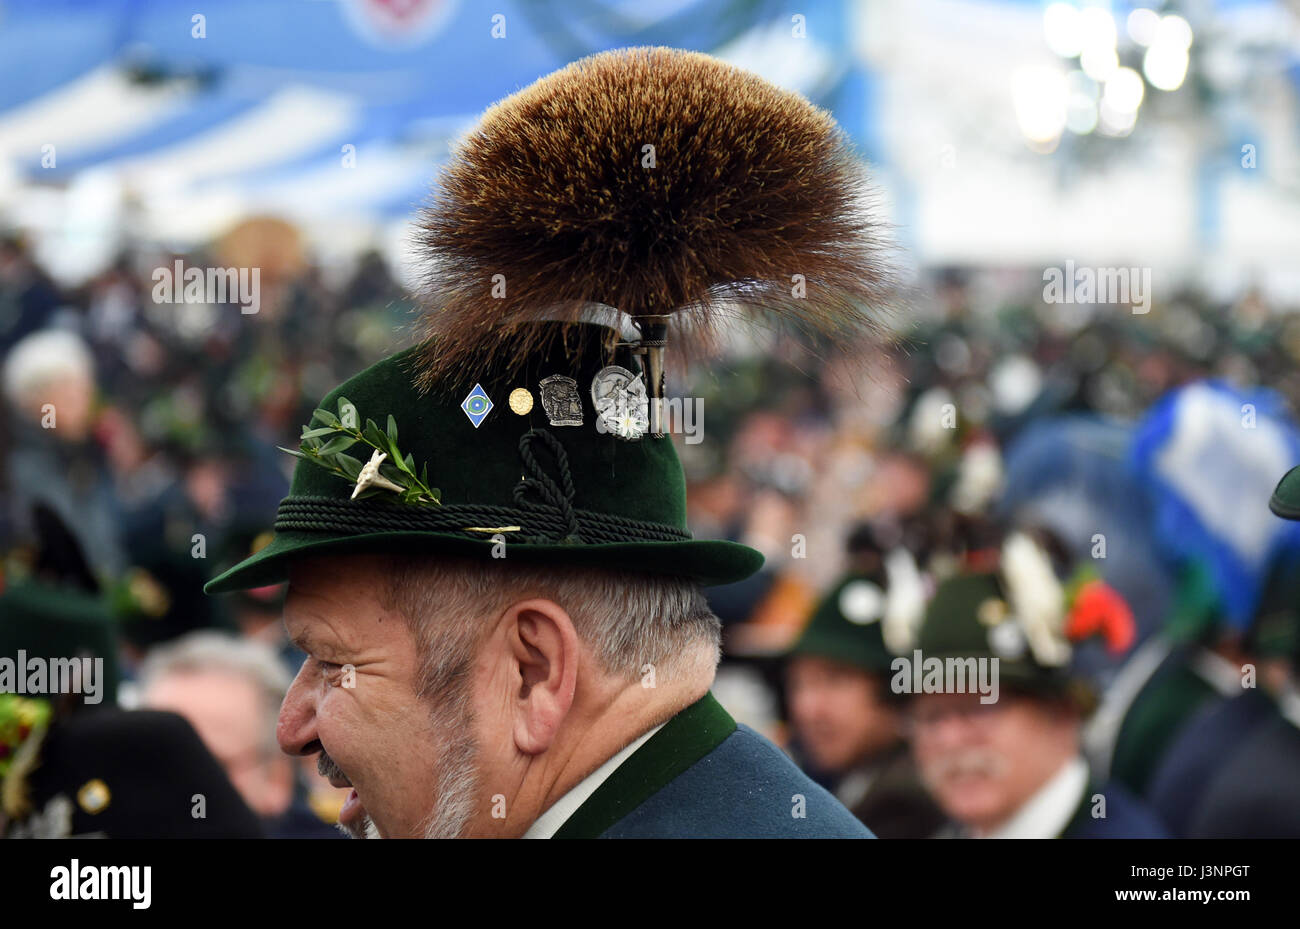 Gaissach, Germany. 7th May, 2017. A member of a traditional Bavarian Gebirgsschuetzen (lit. mountain marksmen) club wearing a Gamsbart hat in a beer tent during traditional Patronatstag feast day celebrations in Gaissach, Germany, 7 May 2017. The meeting takes place every May to honour the patron saint of the Gebirgsschuetzen, Mary the mother of Jesus. Photo: Andreas Gebert/dpa/Alamy Live News Stock Photo